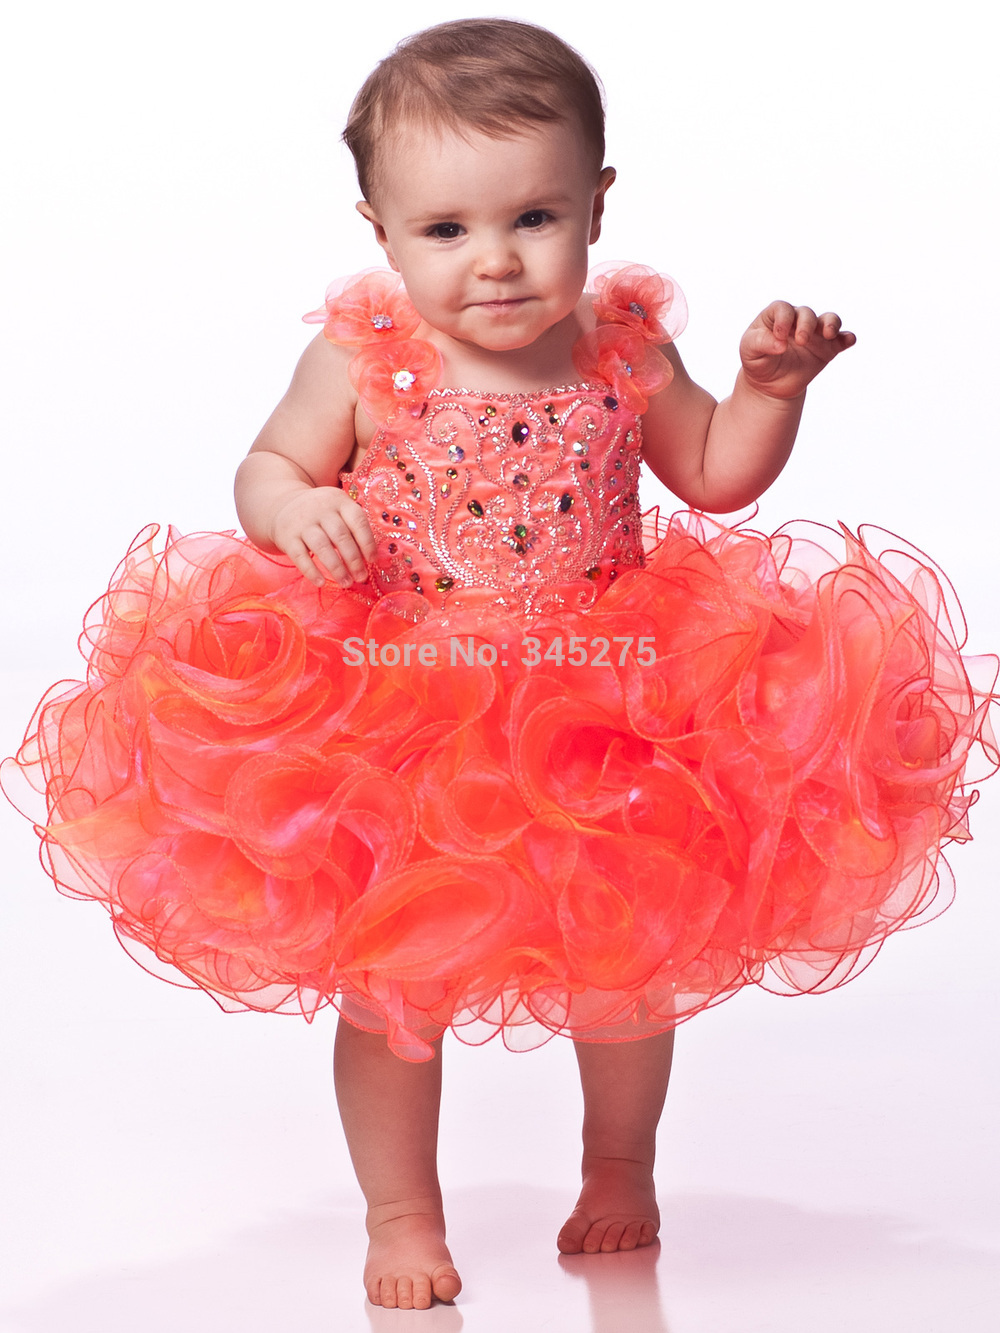 Pageant Dresses For Toddler Girls